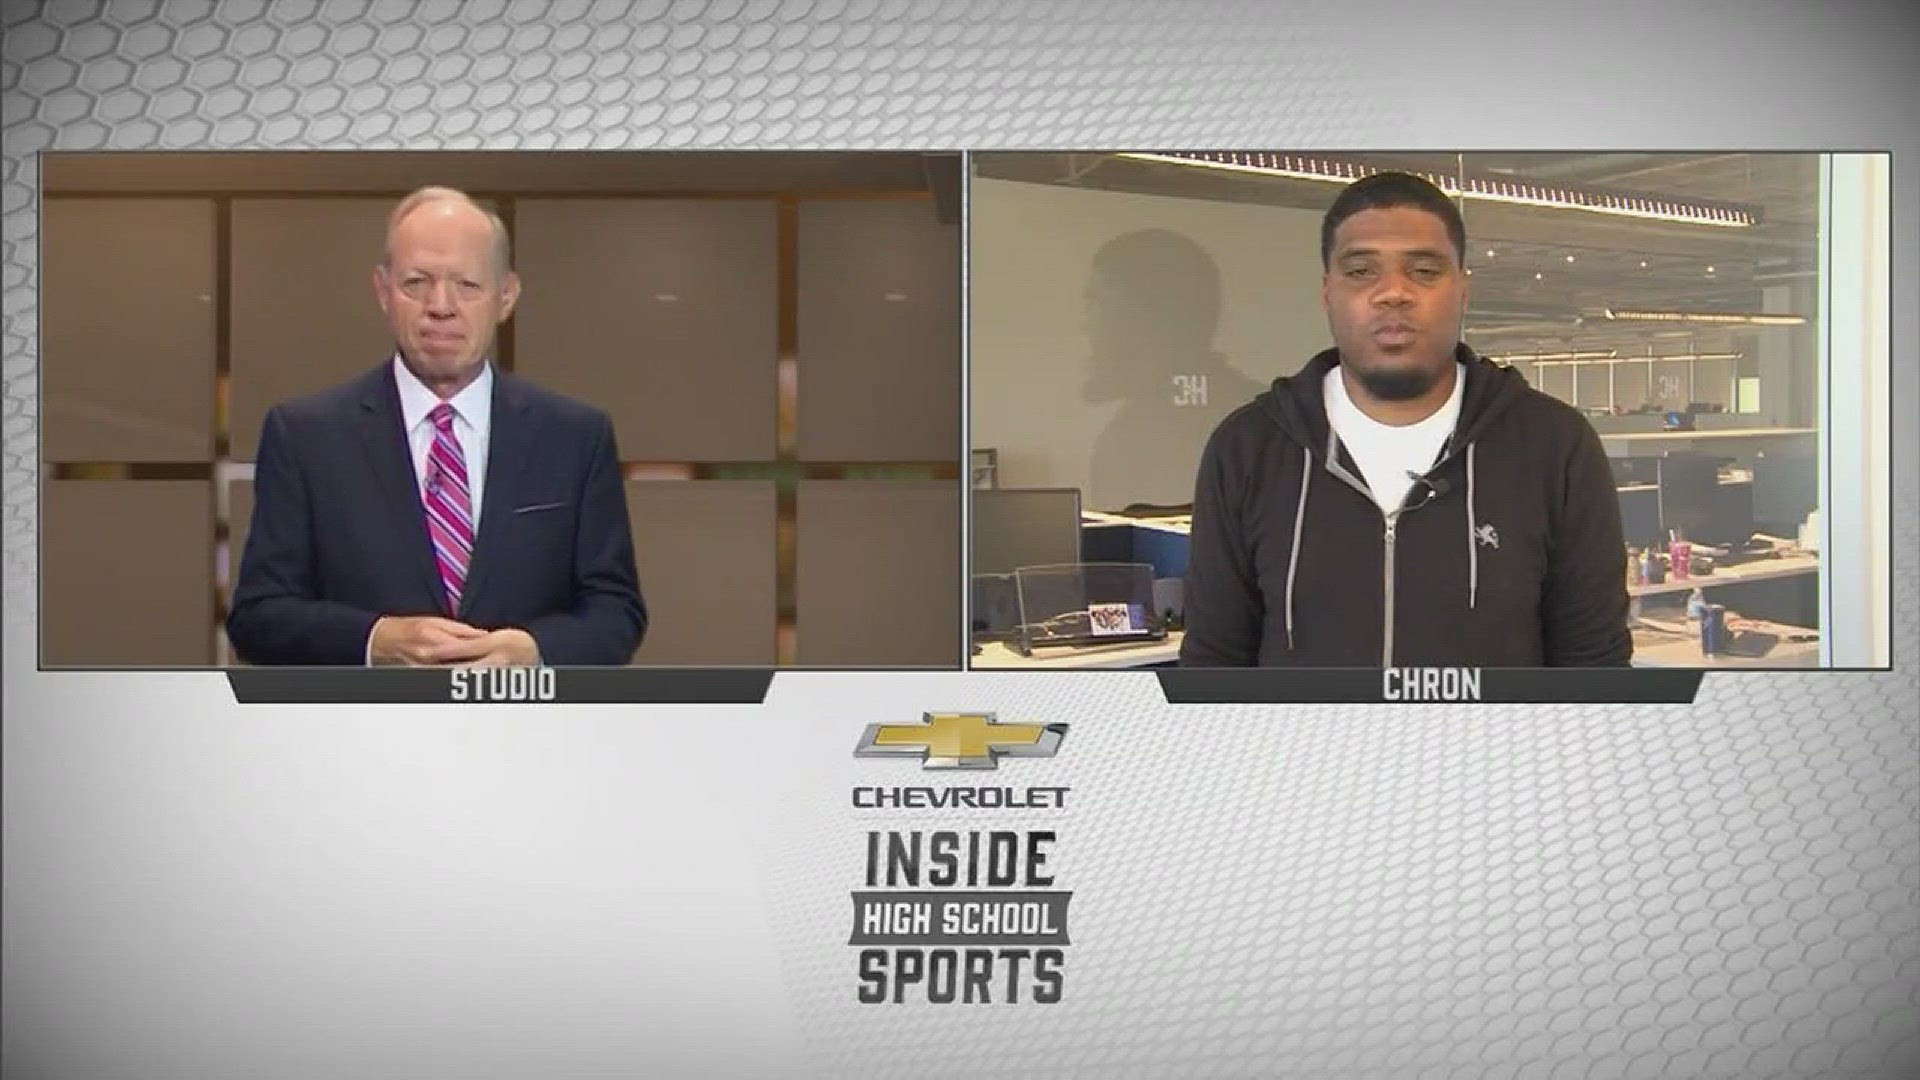 The Chevrolet Inside High School Sports program featured analysis from the Houston Chronicle's Adam Coleman.